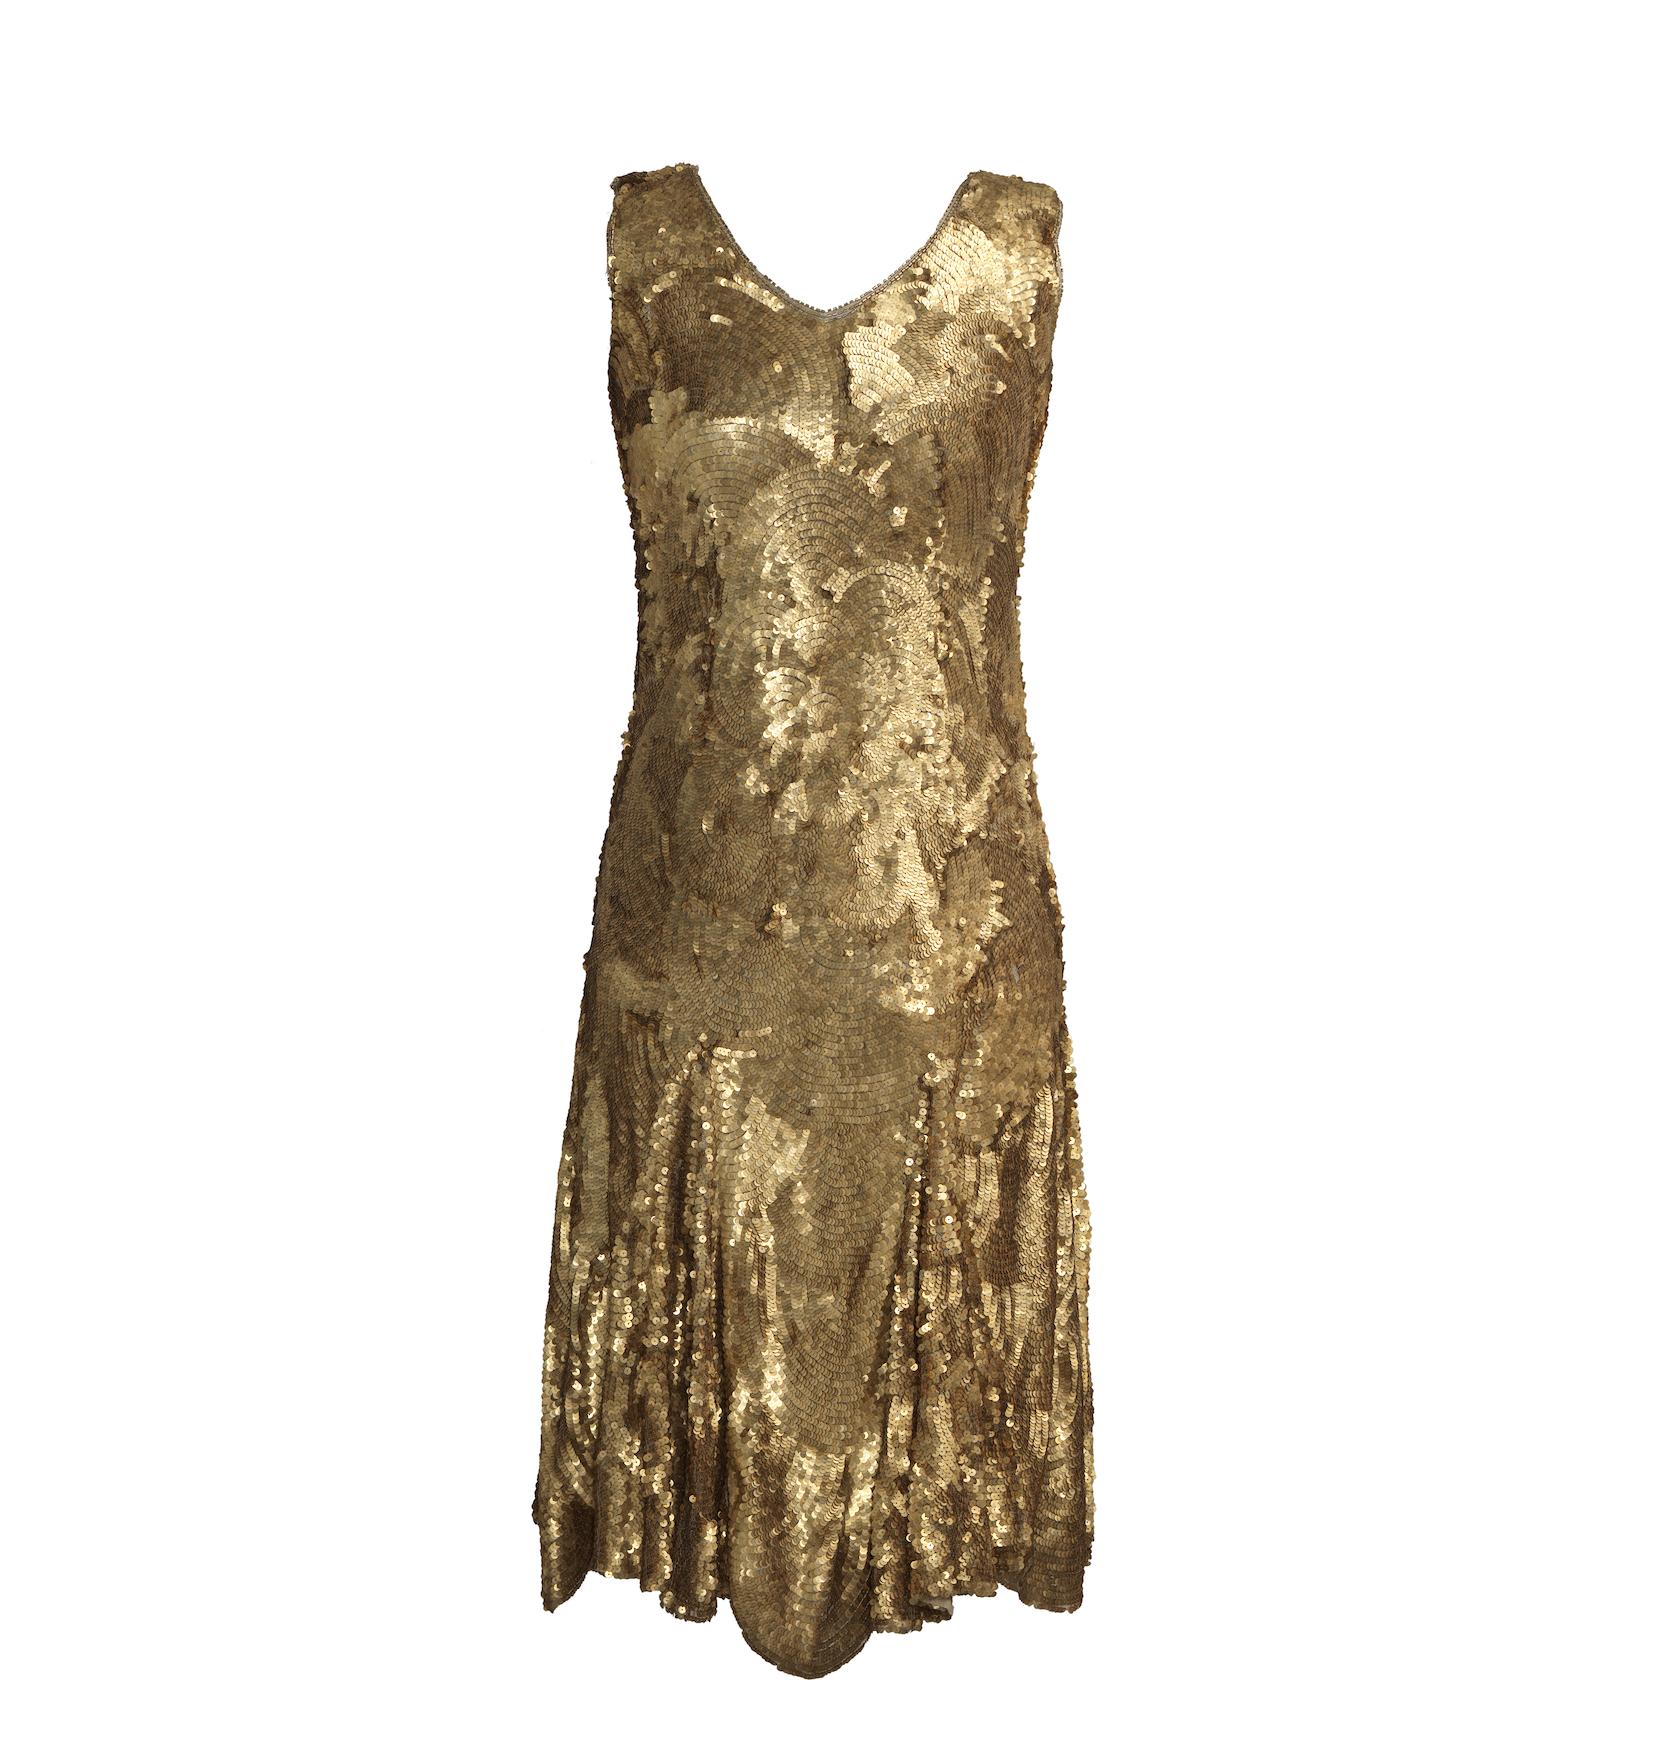 Gold sequined dress, circa 1927-29, sequins over silk and net. Amedee, Paris, France, founded 1851. 40 1/2 by 14 1/4in. Courtesy of the Kansas City Museum, Kansas City, Missouri, 1949.119